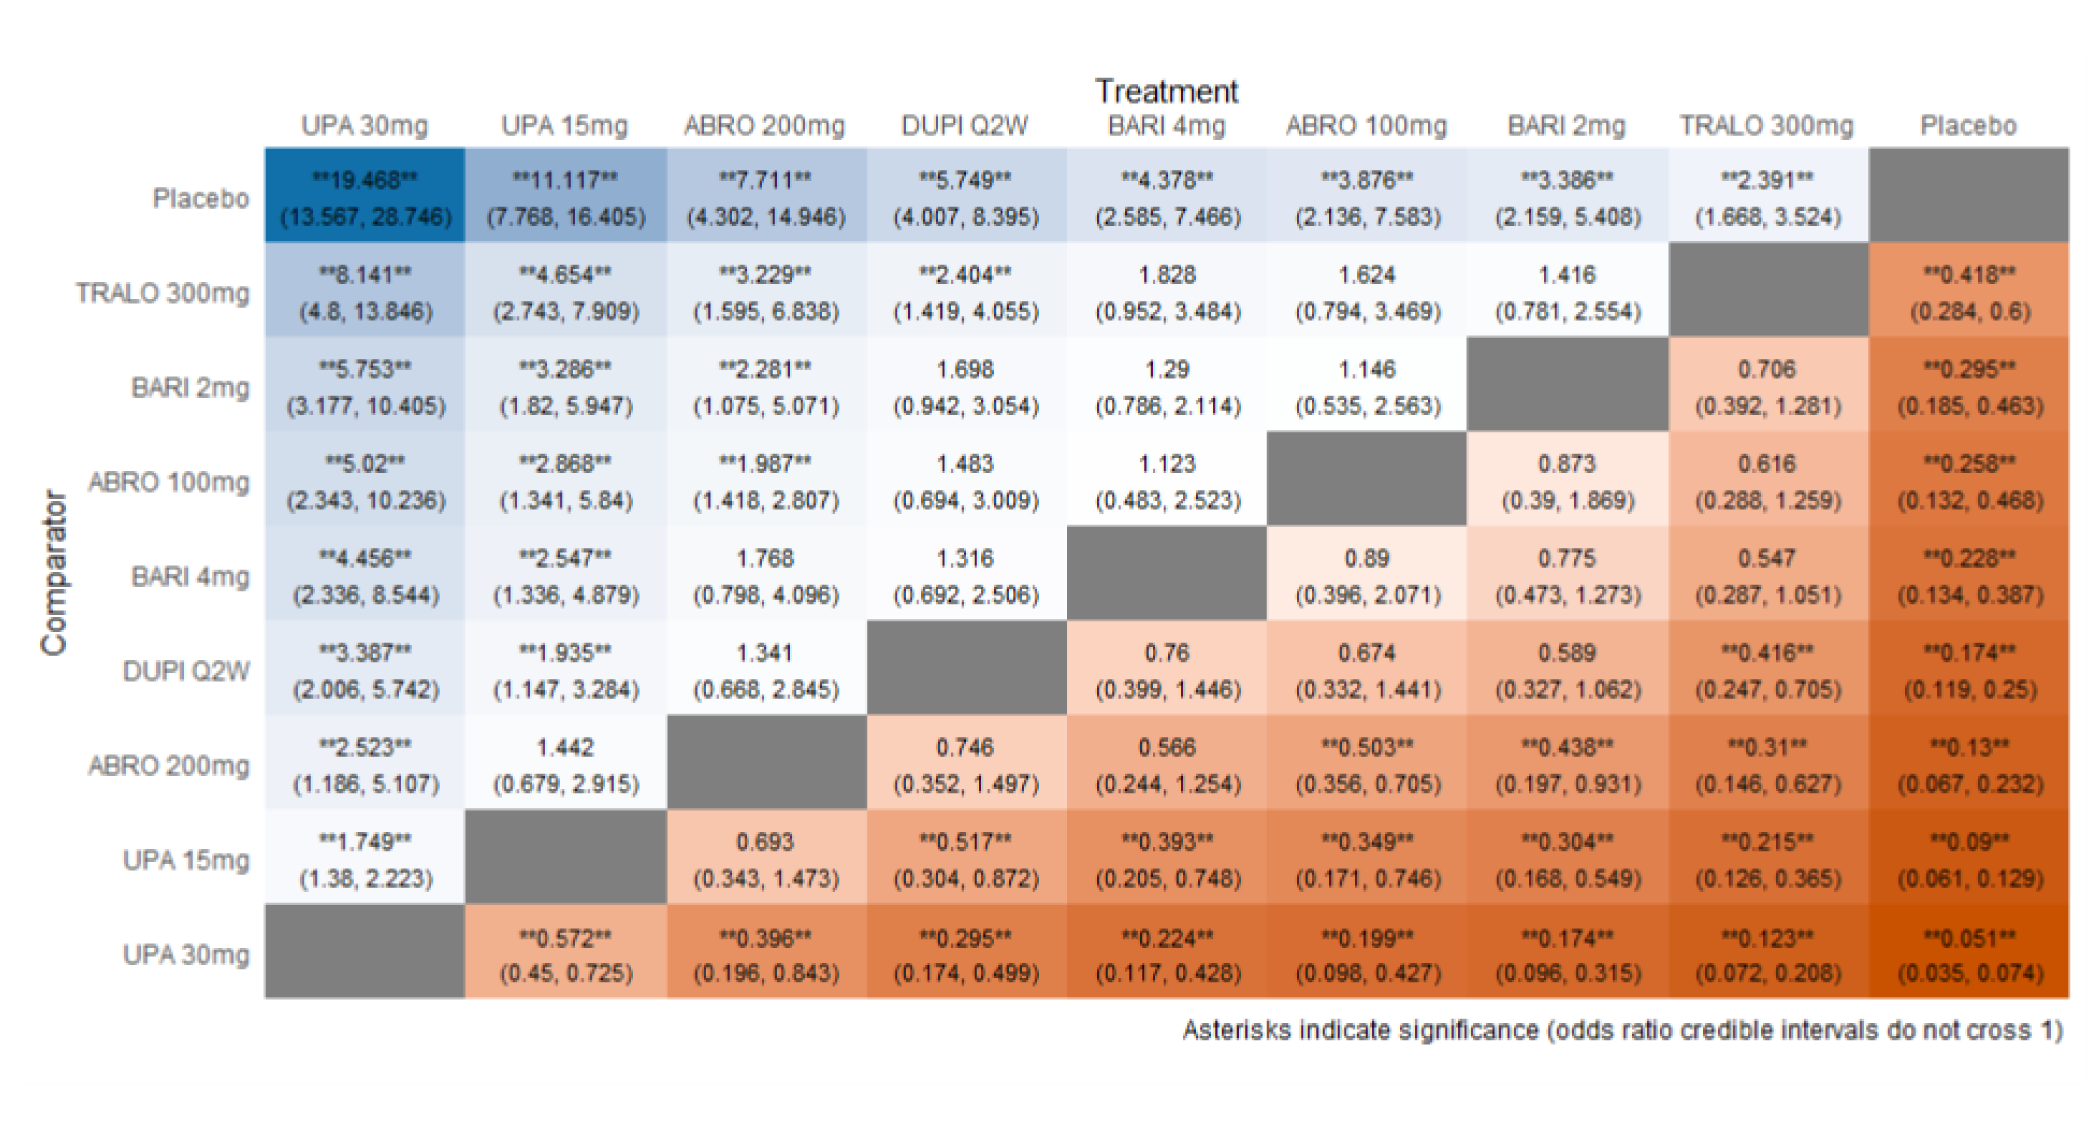 Figure depicts the league table of monotherapy randomized controlled trials, including abrocitinib 100 mg, abrocitinib 200 mg, baricitinib 2 mg, baricitinib 4 mg, upadacitinib 300 mg, tralokinumab, and dupilumab